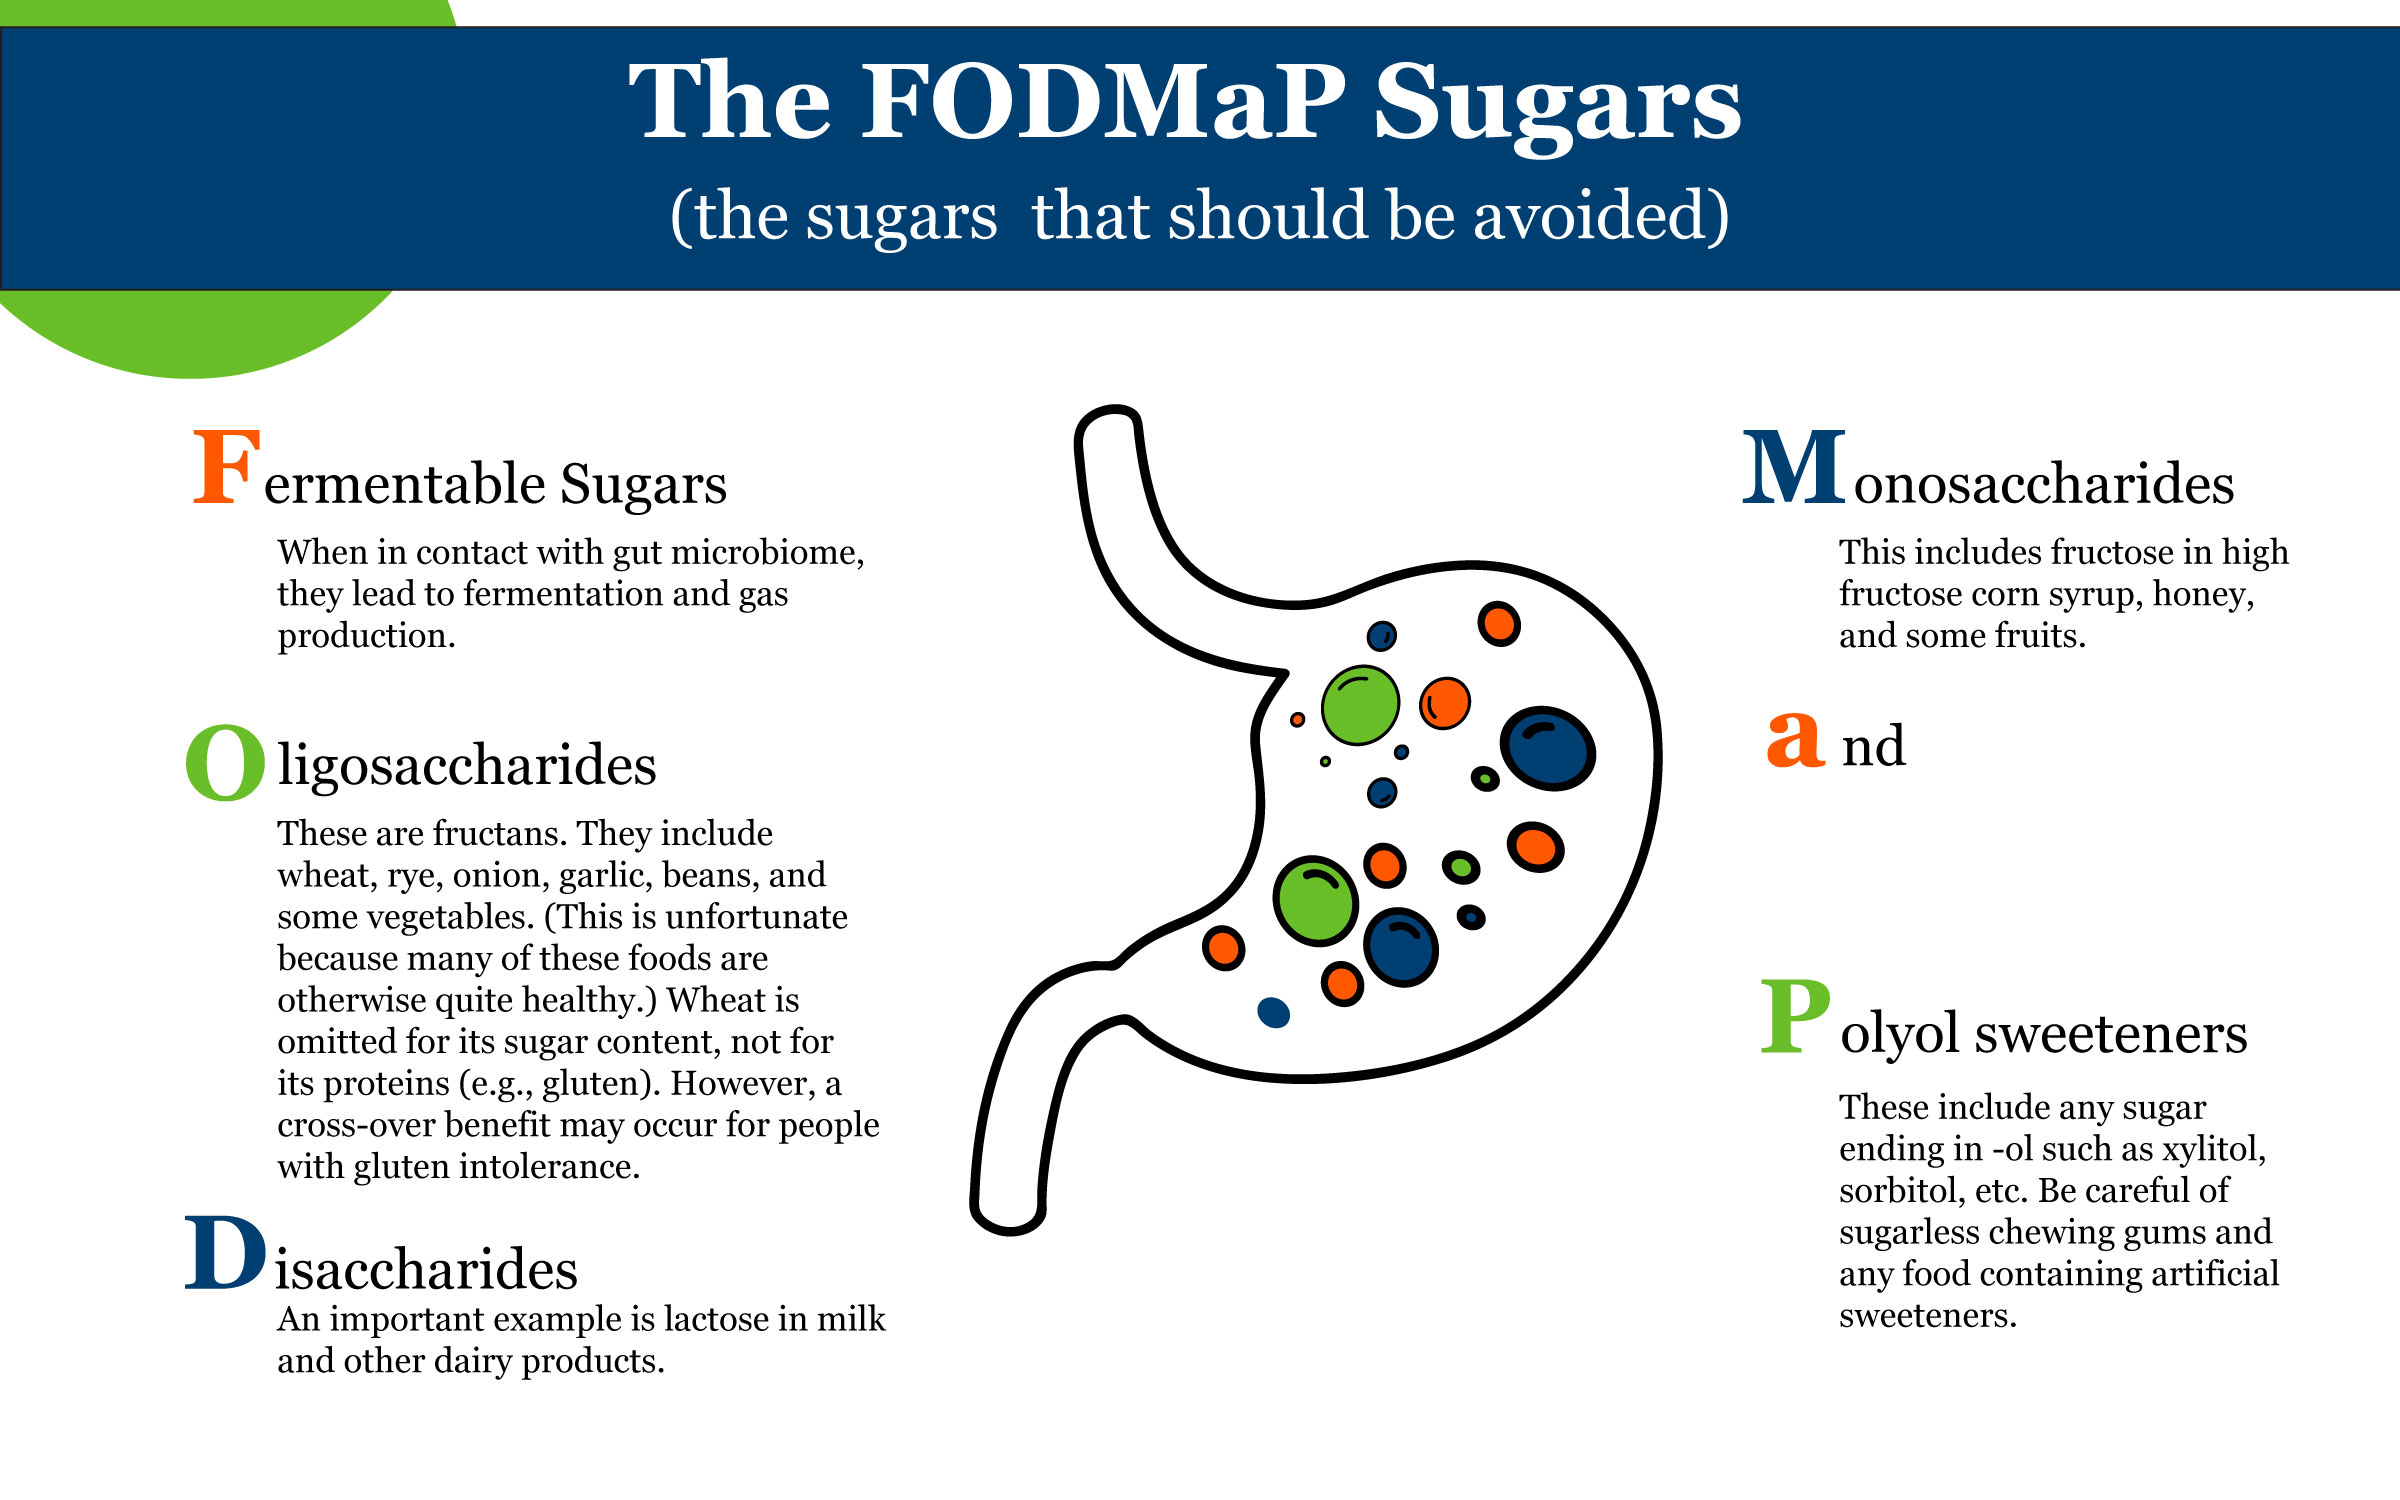 Figure 1. The FODMaP diet’s five classes of sugars to avoid.